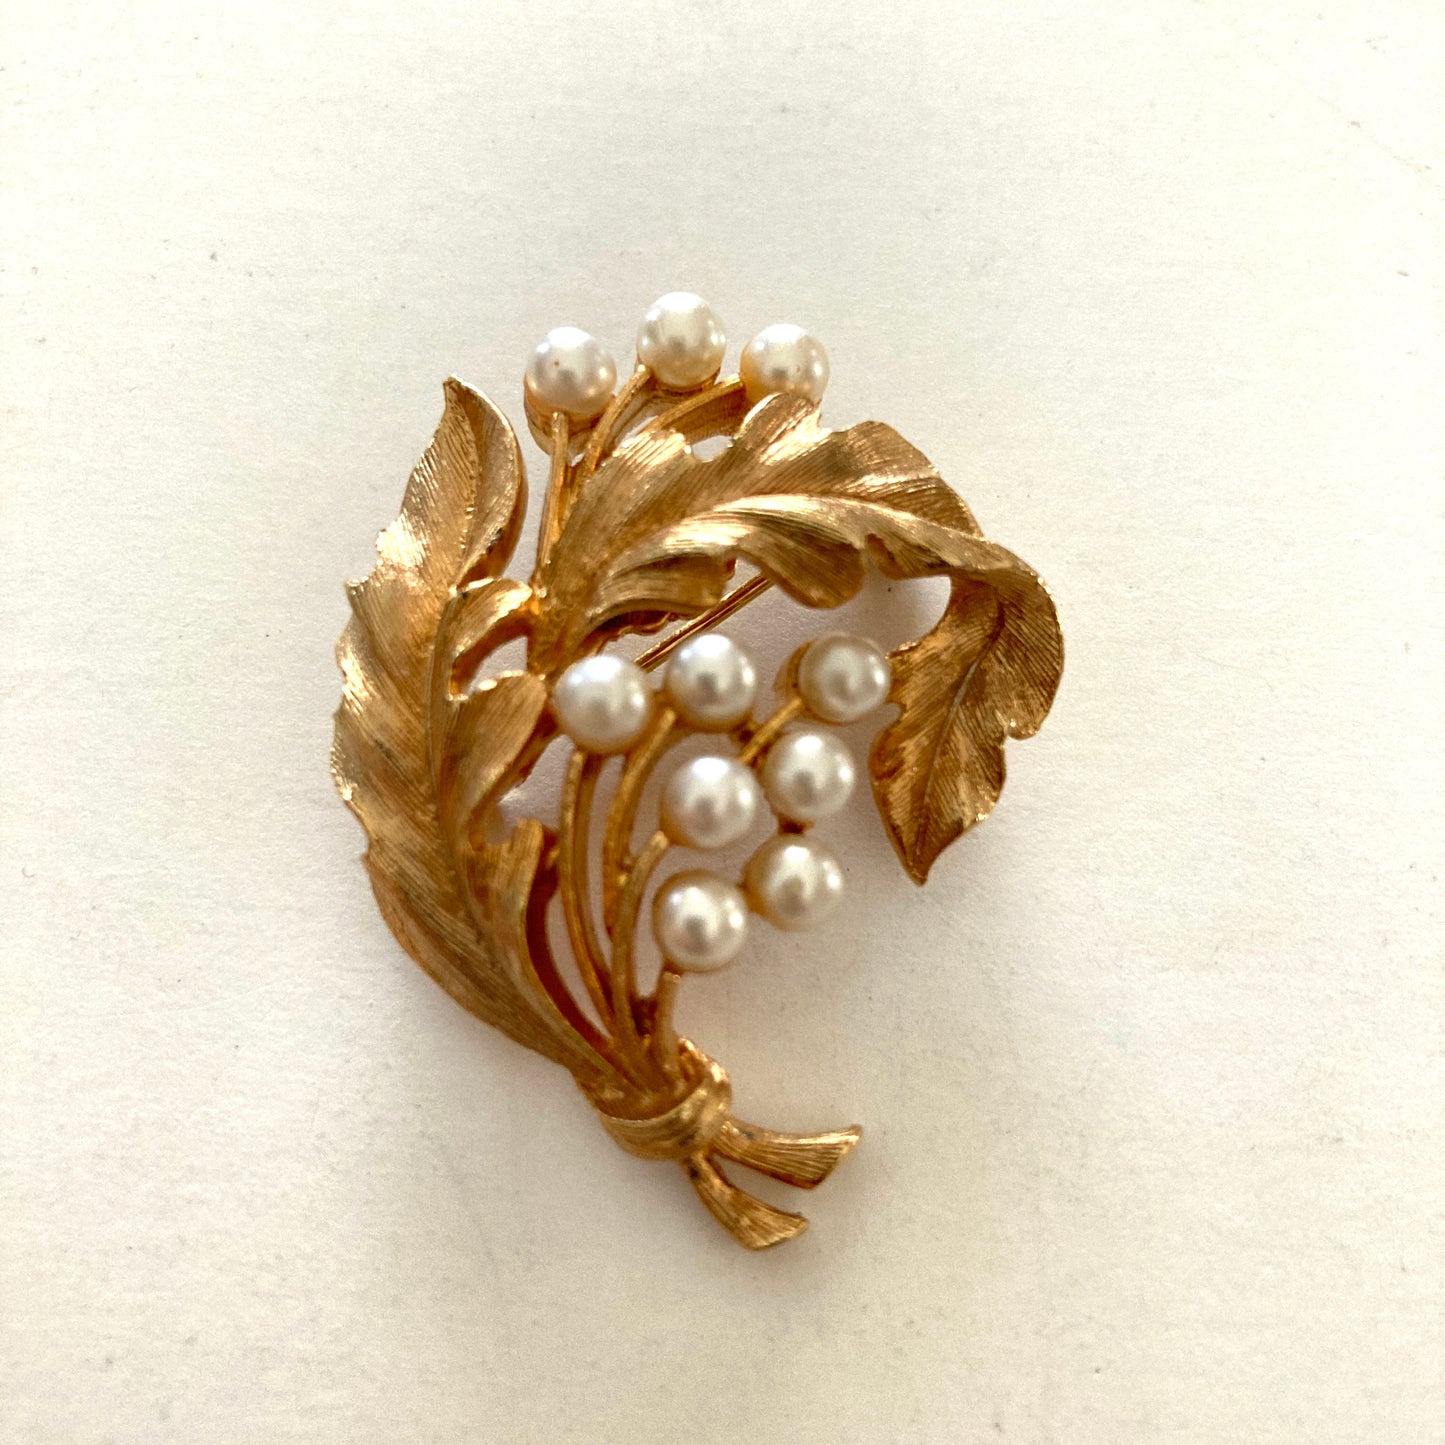 Gold Tone Leaves and Pearls Brooch by JJ